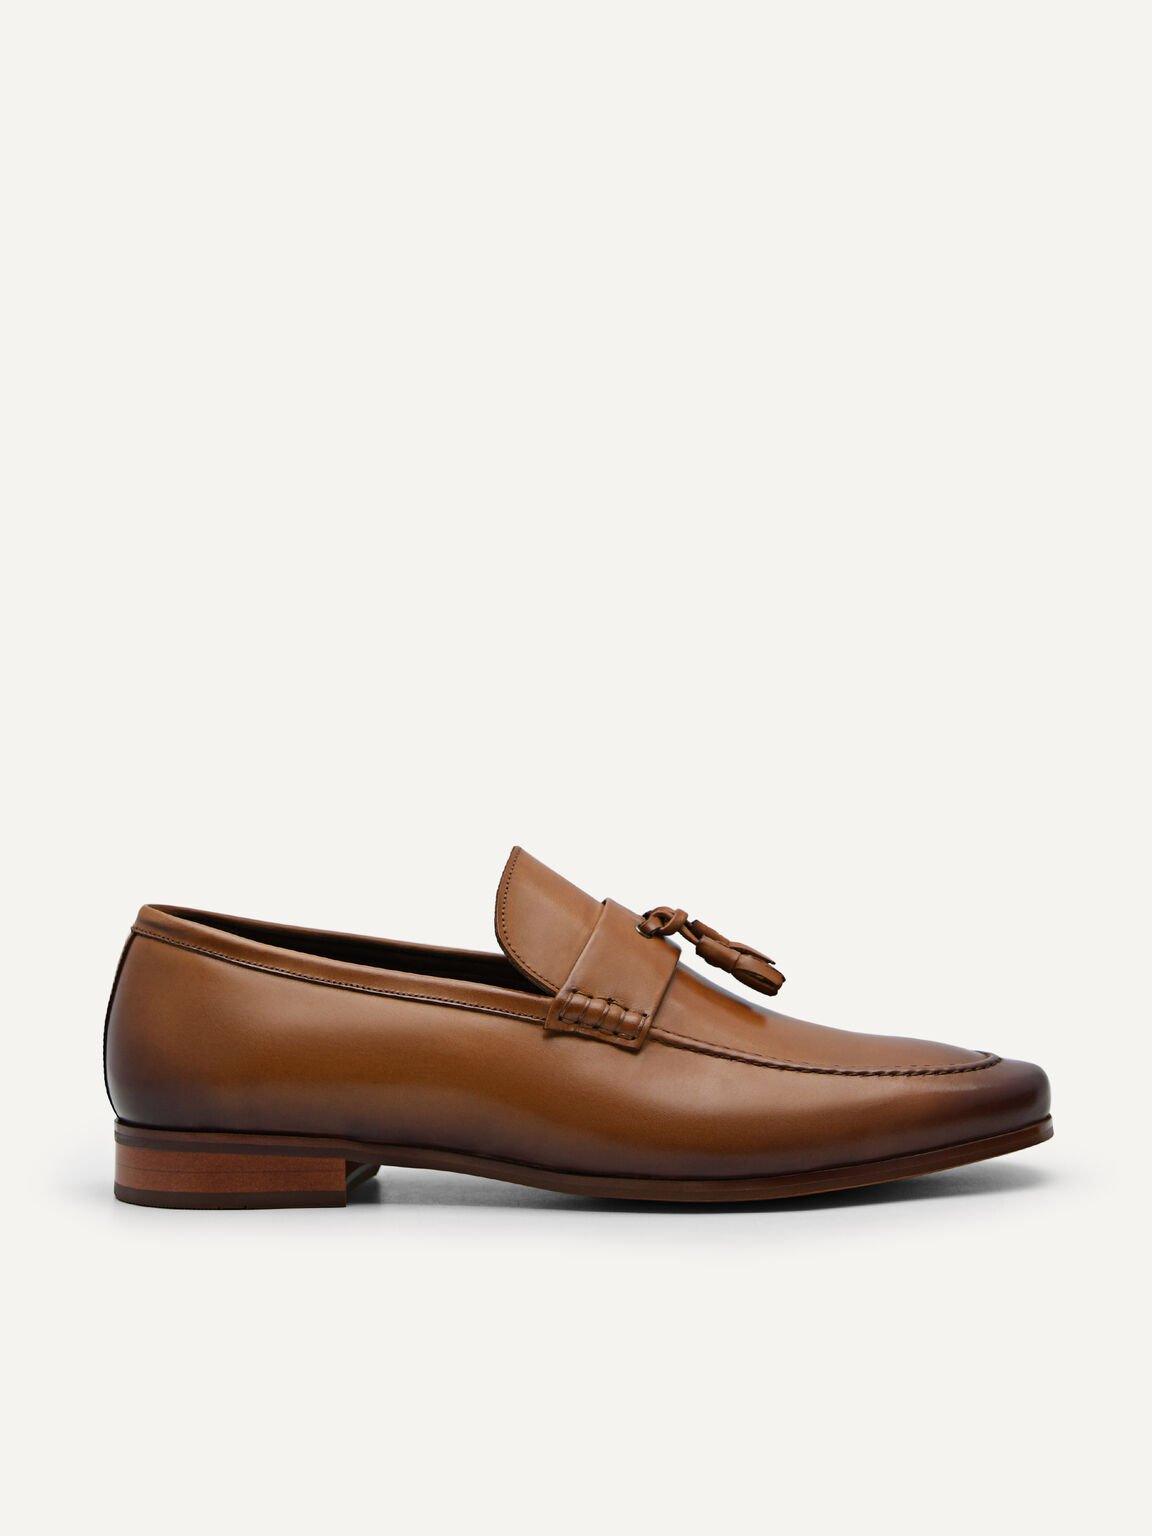 Leather Penny Loafers with Tassels, Camel